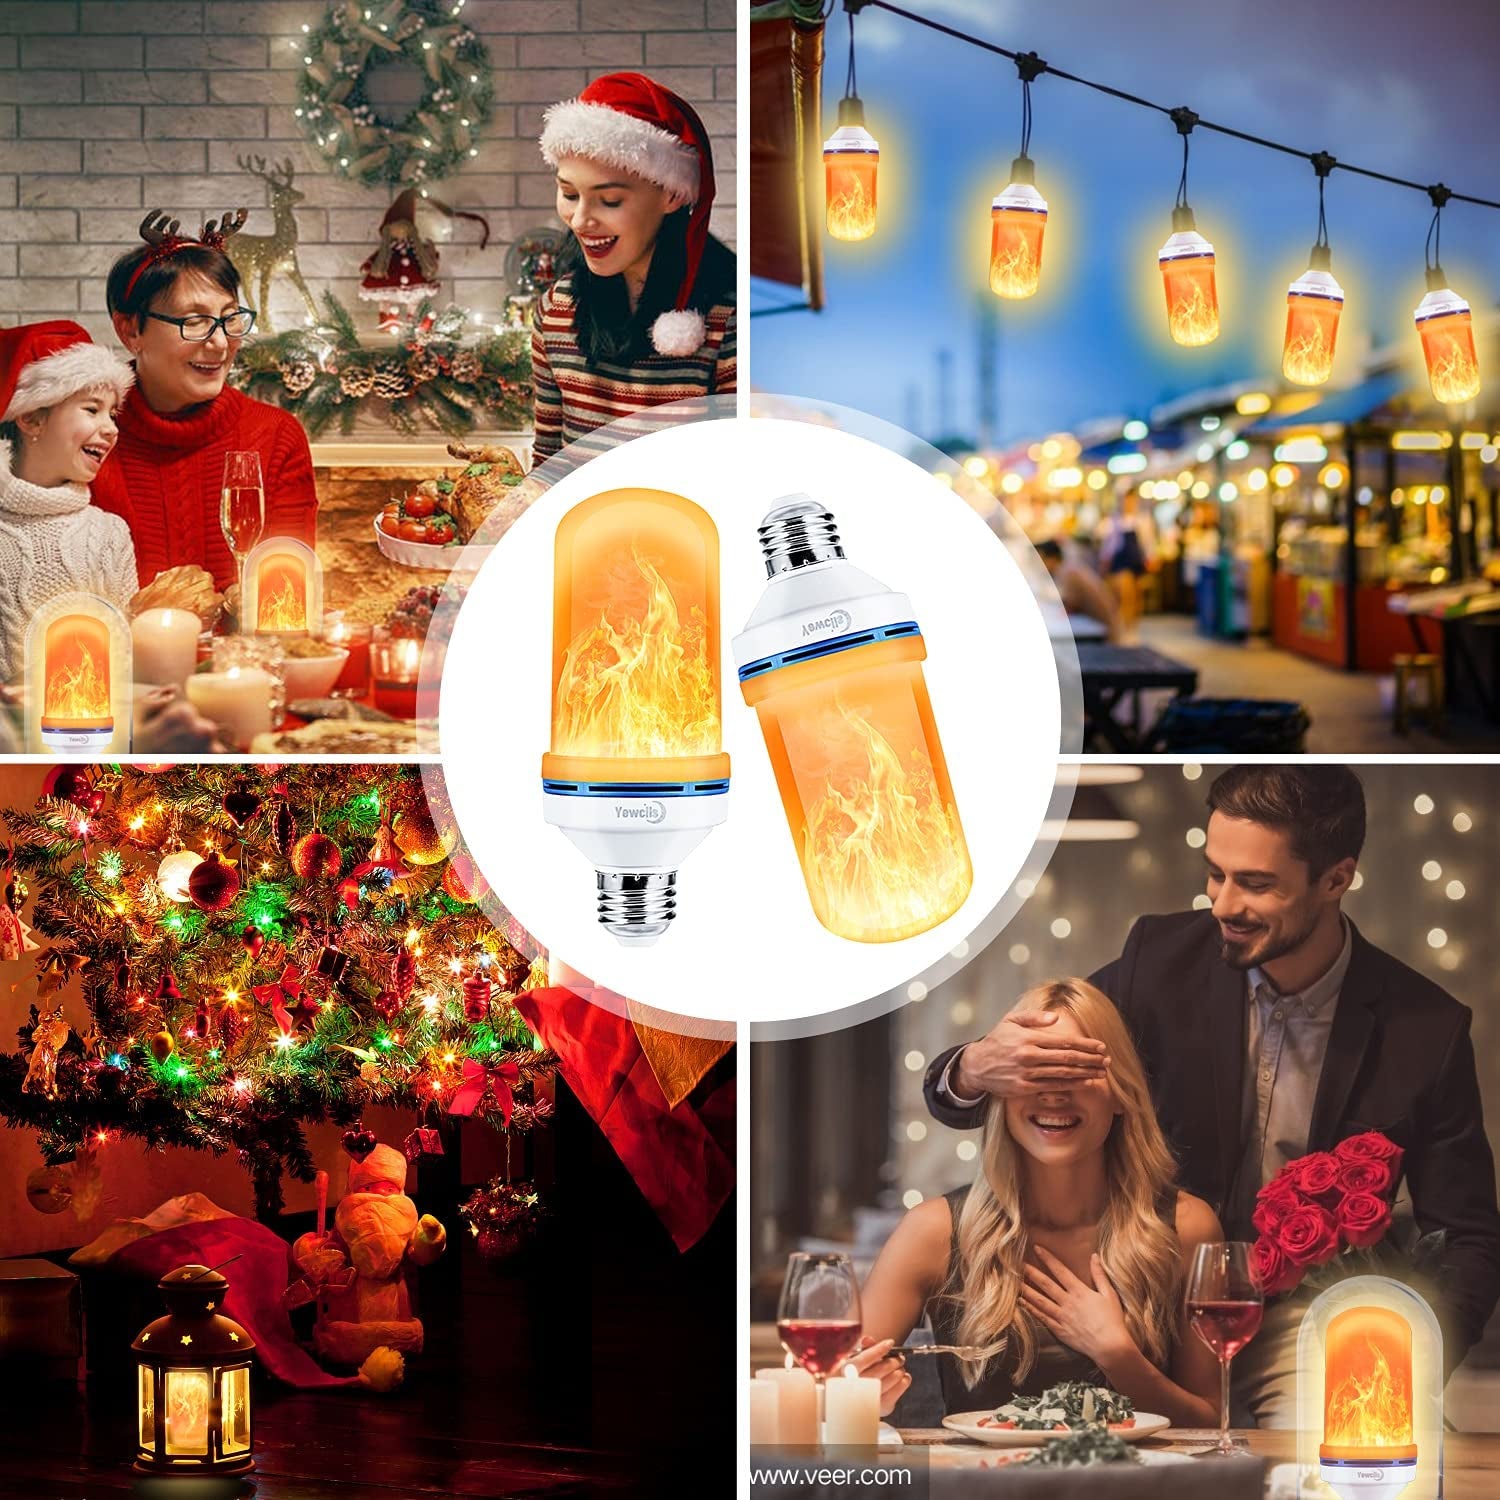 2 Pack LED Flame Effect Light Bulb, 4 Modes E26 Base Fire Light Bulbs with Gravity Sensor, Flickering Light Bulb for Indoor / Outdoor / Home / Christmas Decoration 